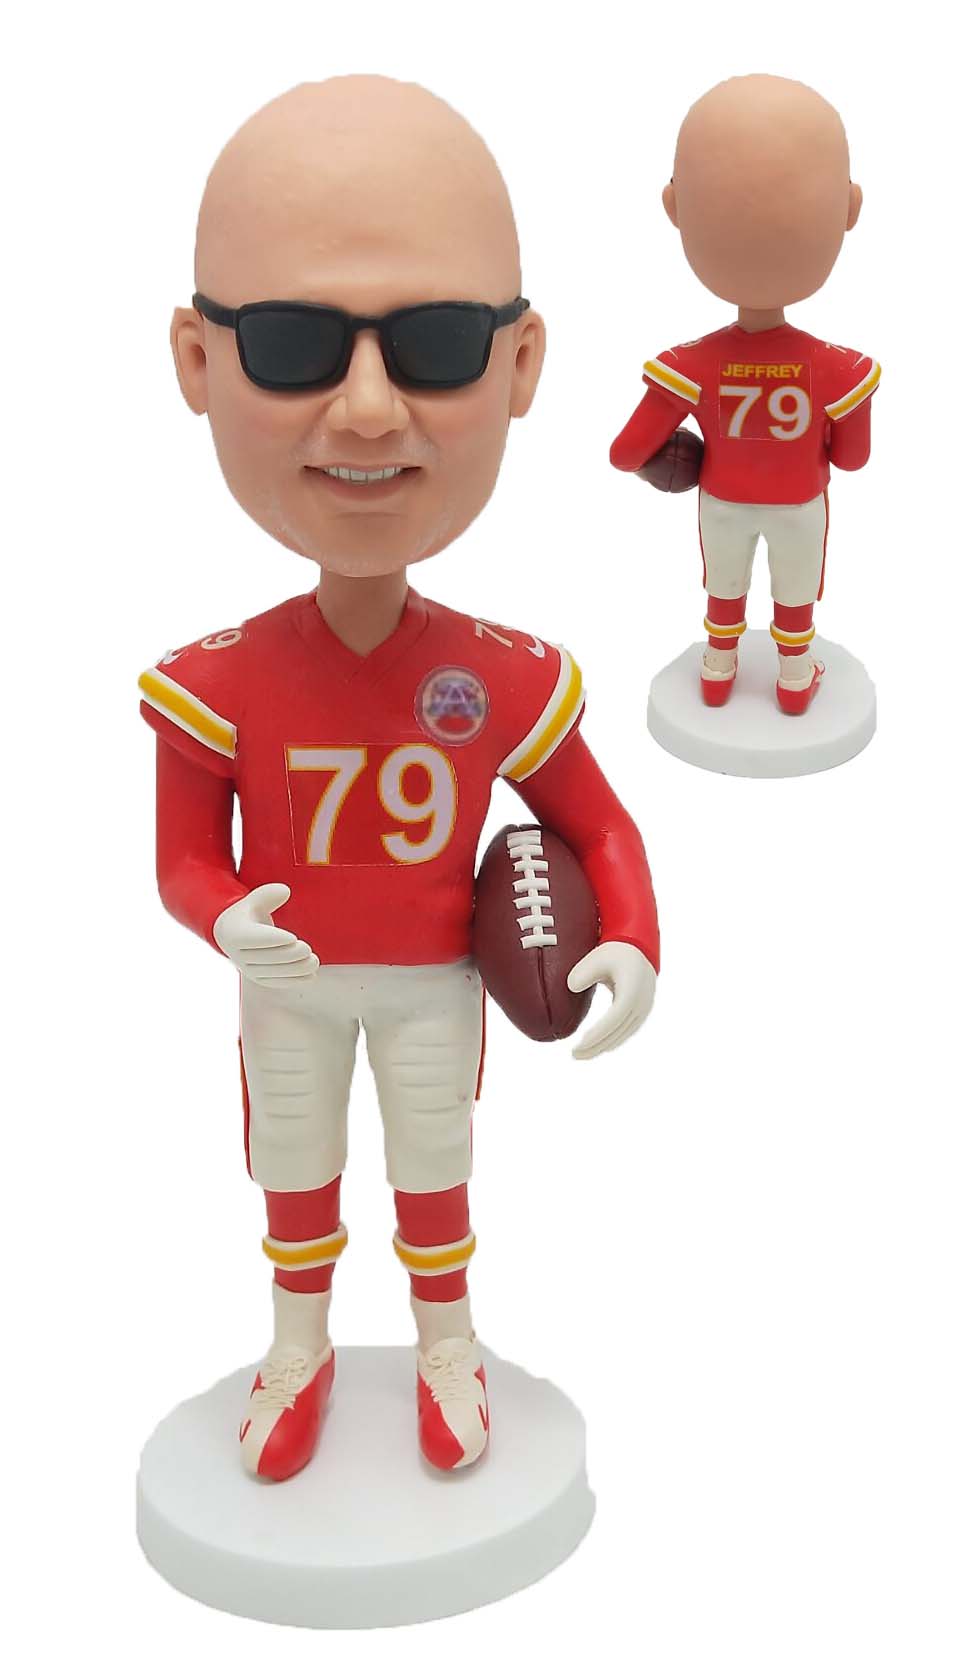 Customized Bobble heads Personalized Bobbleheads Football Player